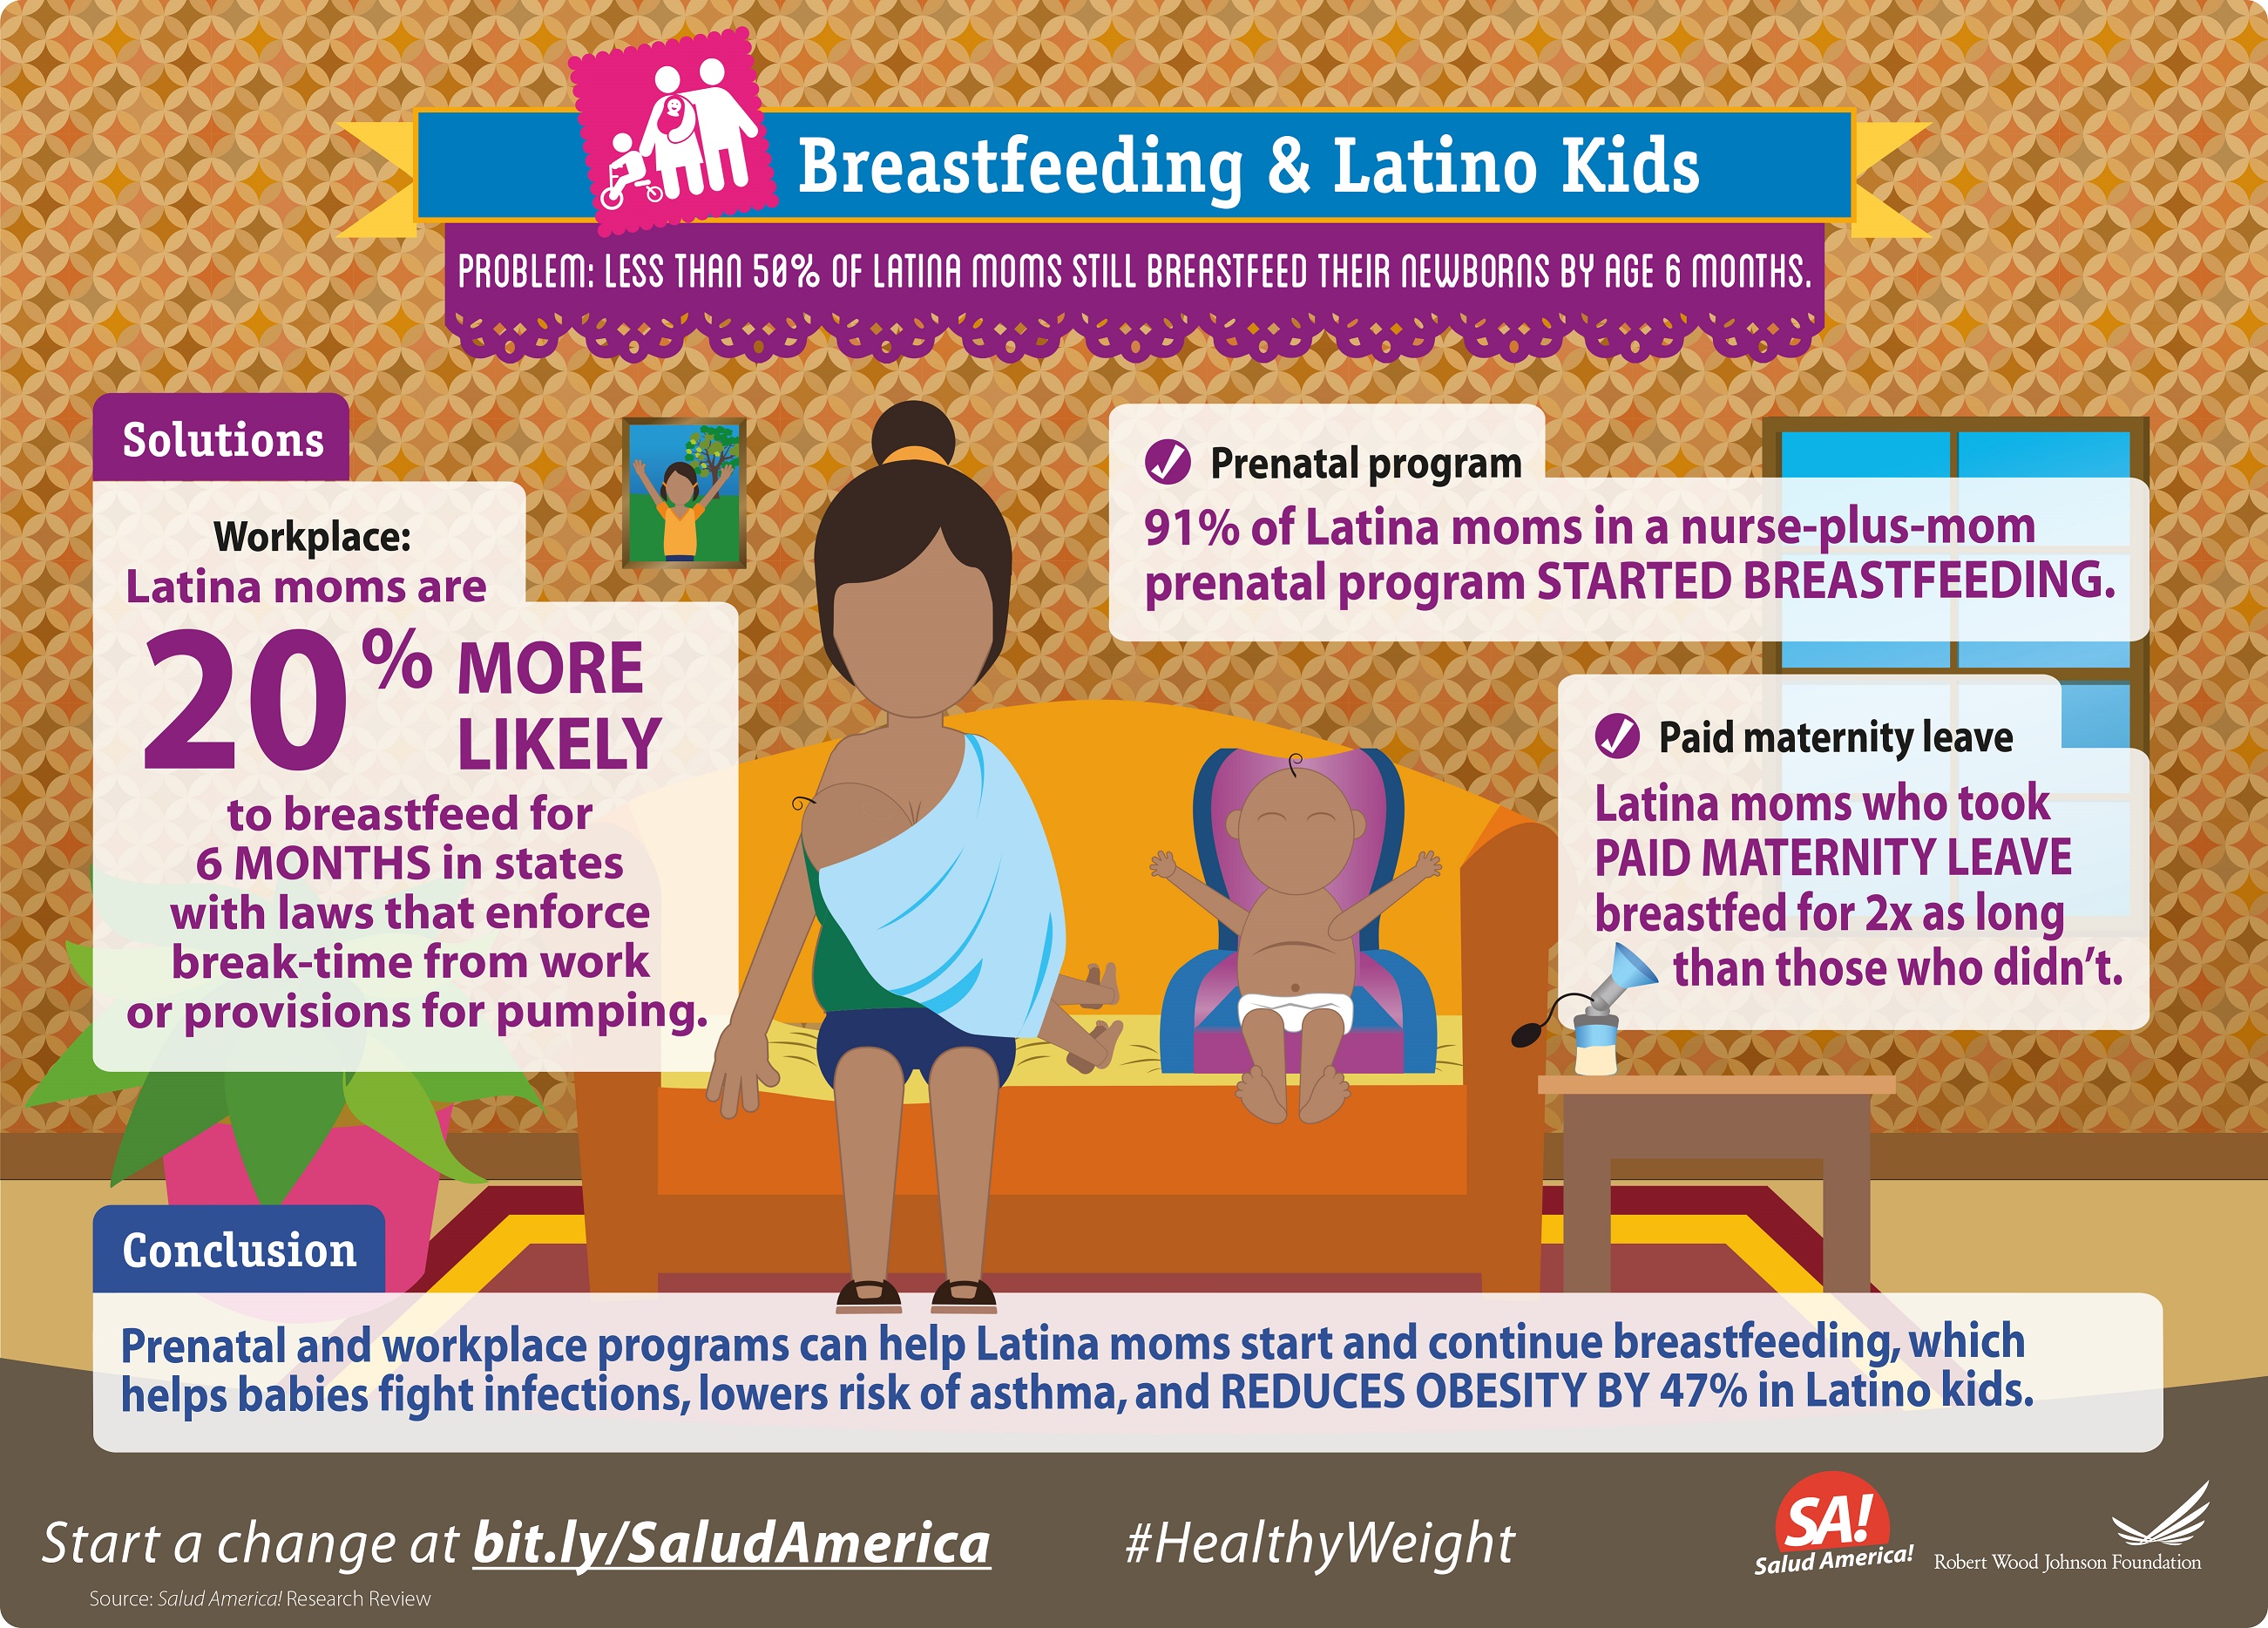 Latina moms who took paid family leave breastfed for two times as long as those who didn’t